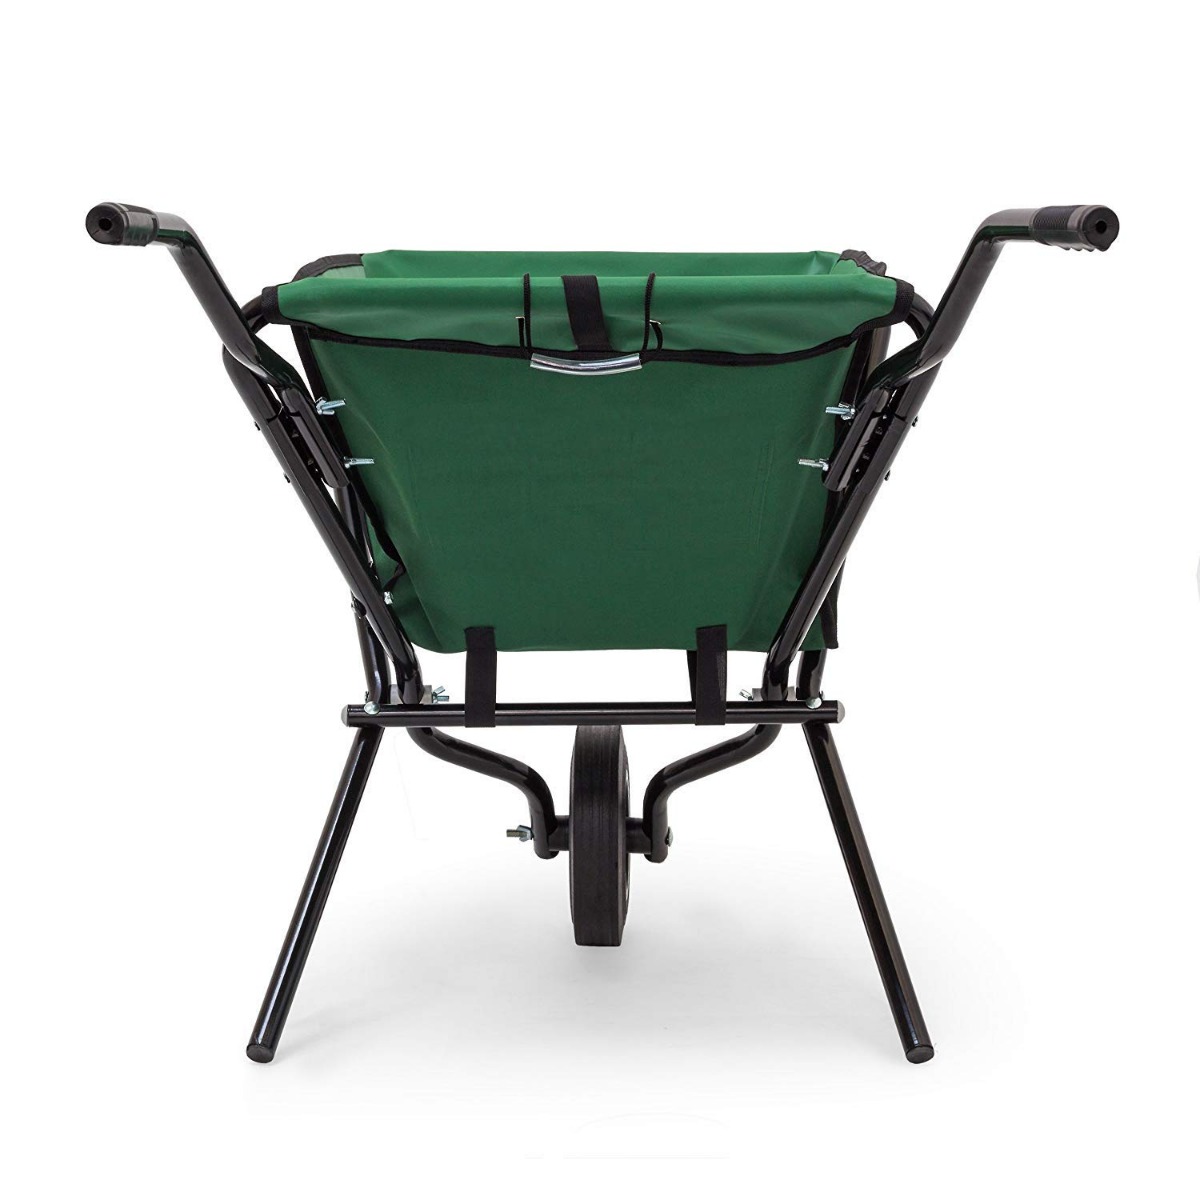 Green Foldable Wheelbarrow 66x64x112cm – 26x25x44in – Steel with Strong Polyester Space-Saving Garden Cart Gardening Wheelbarrow Holds up to 30 kg (60lbs) -7483